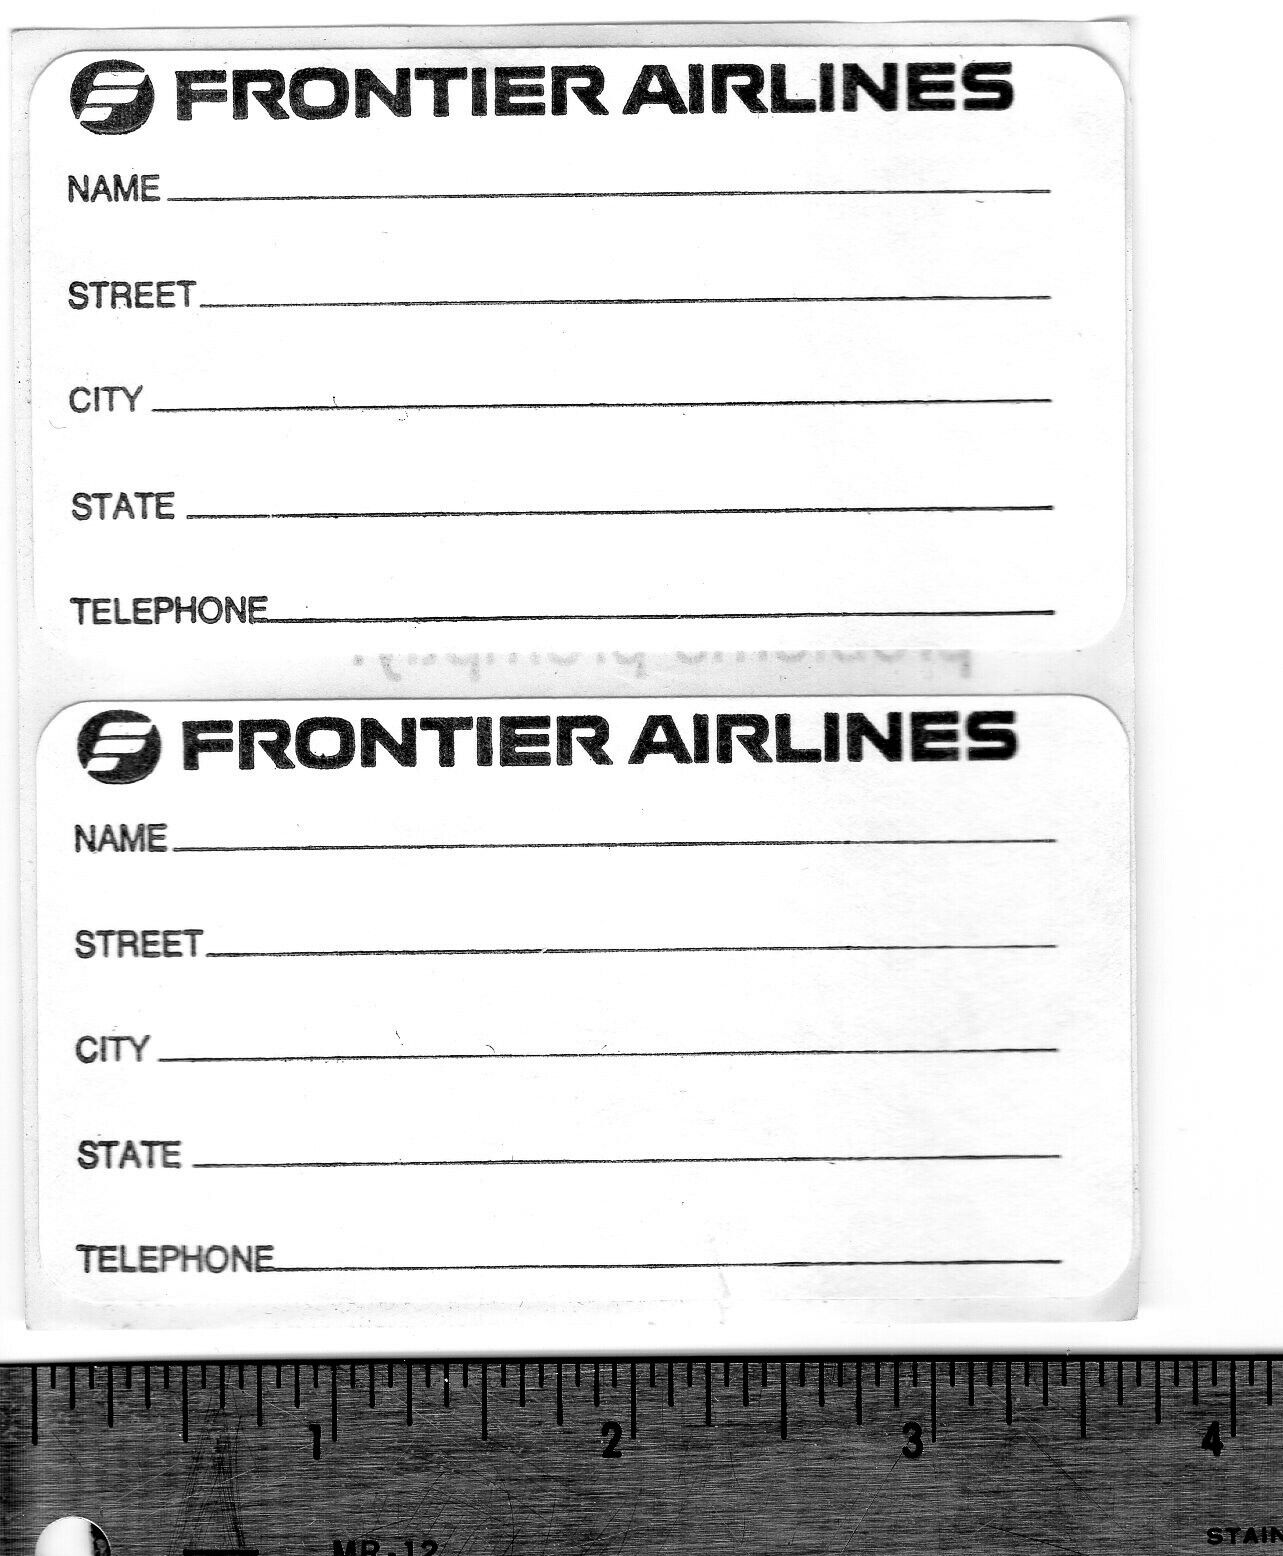 FRONTIER AIRLINES 1978 LUGGAGE STICKERS